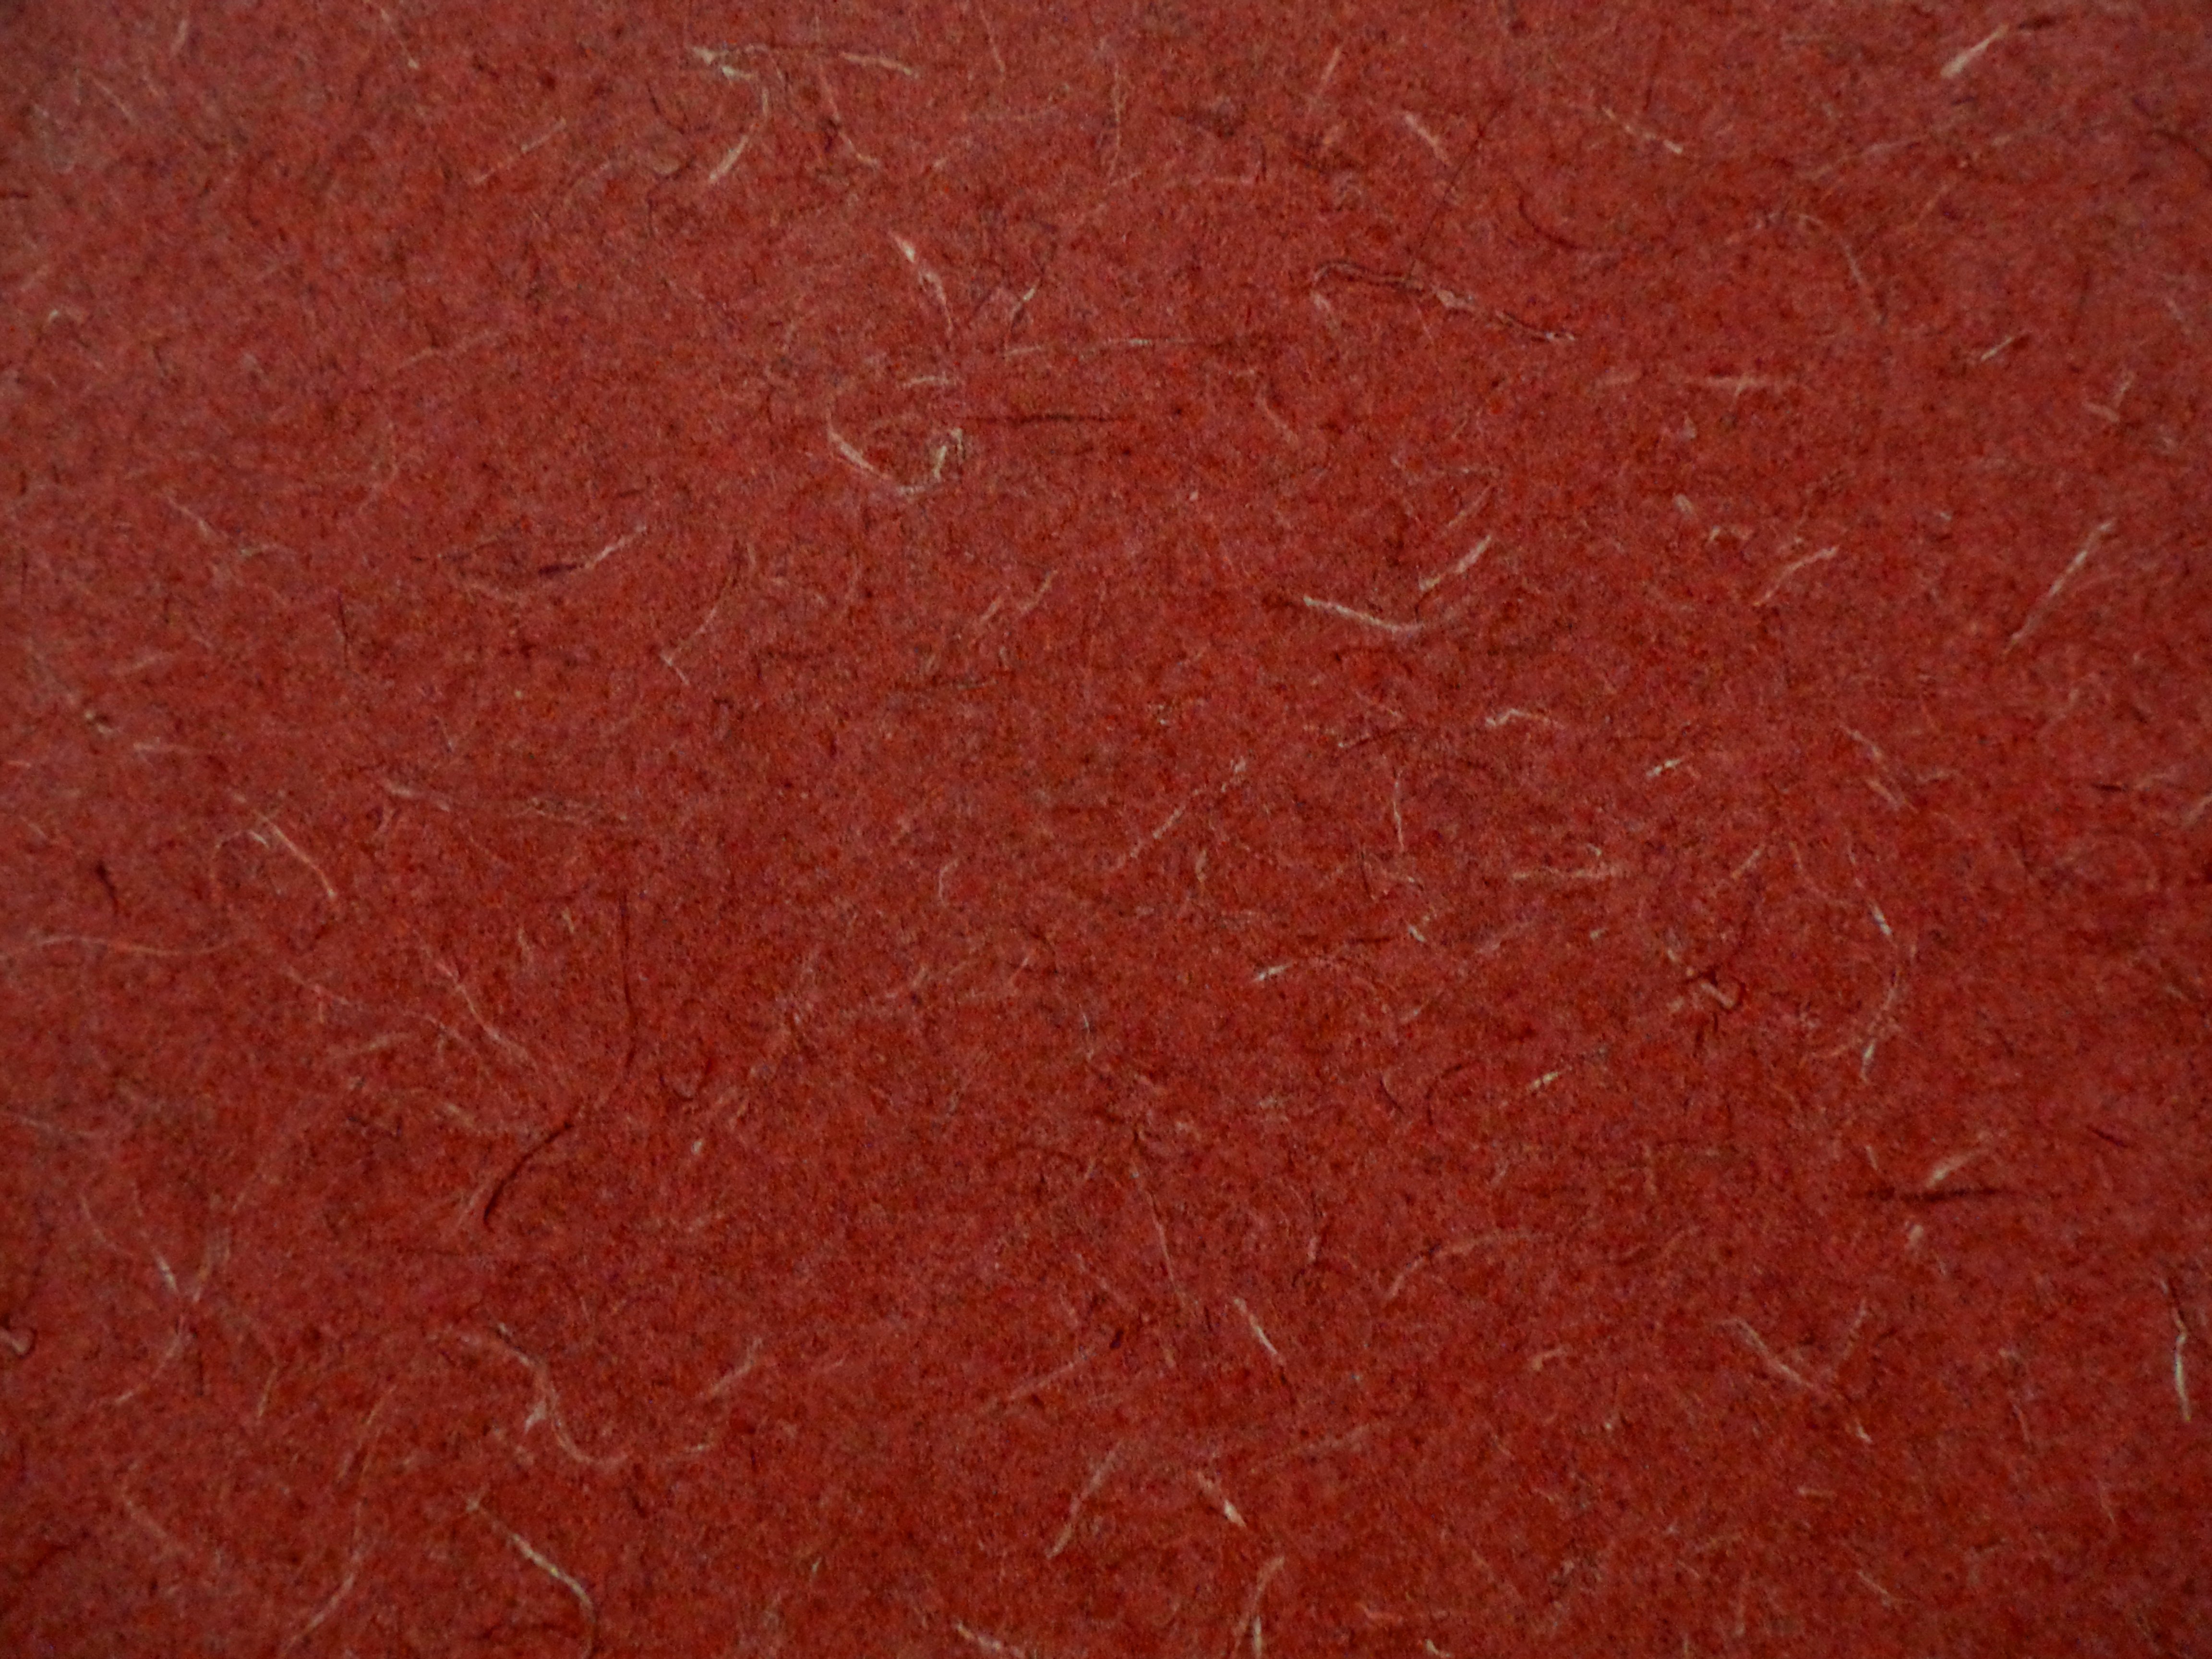 Red Abstract Pattern Laminate Countertop Texture Picture | Free ...